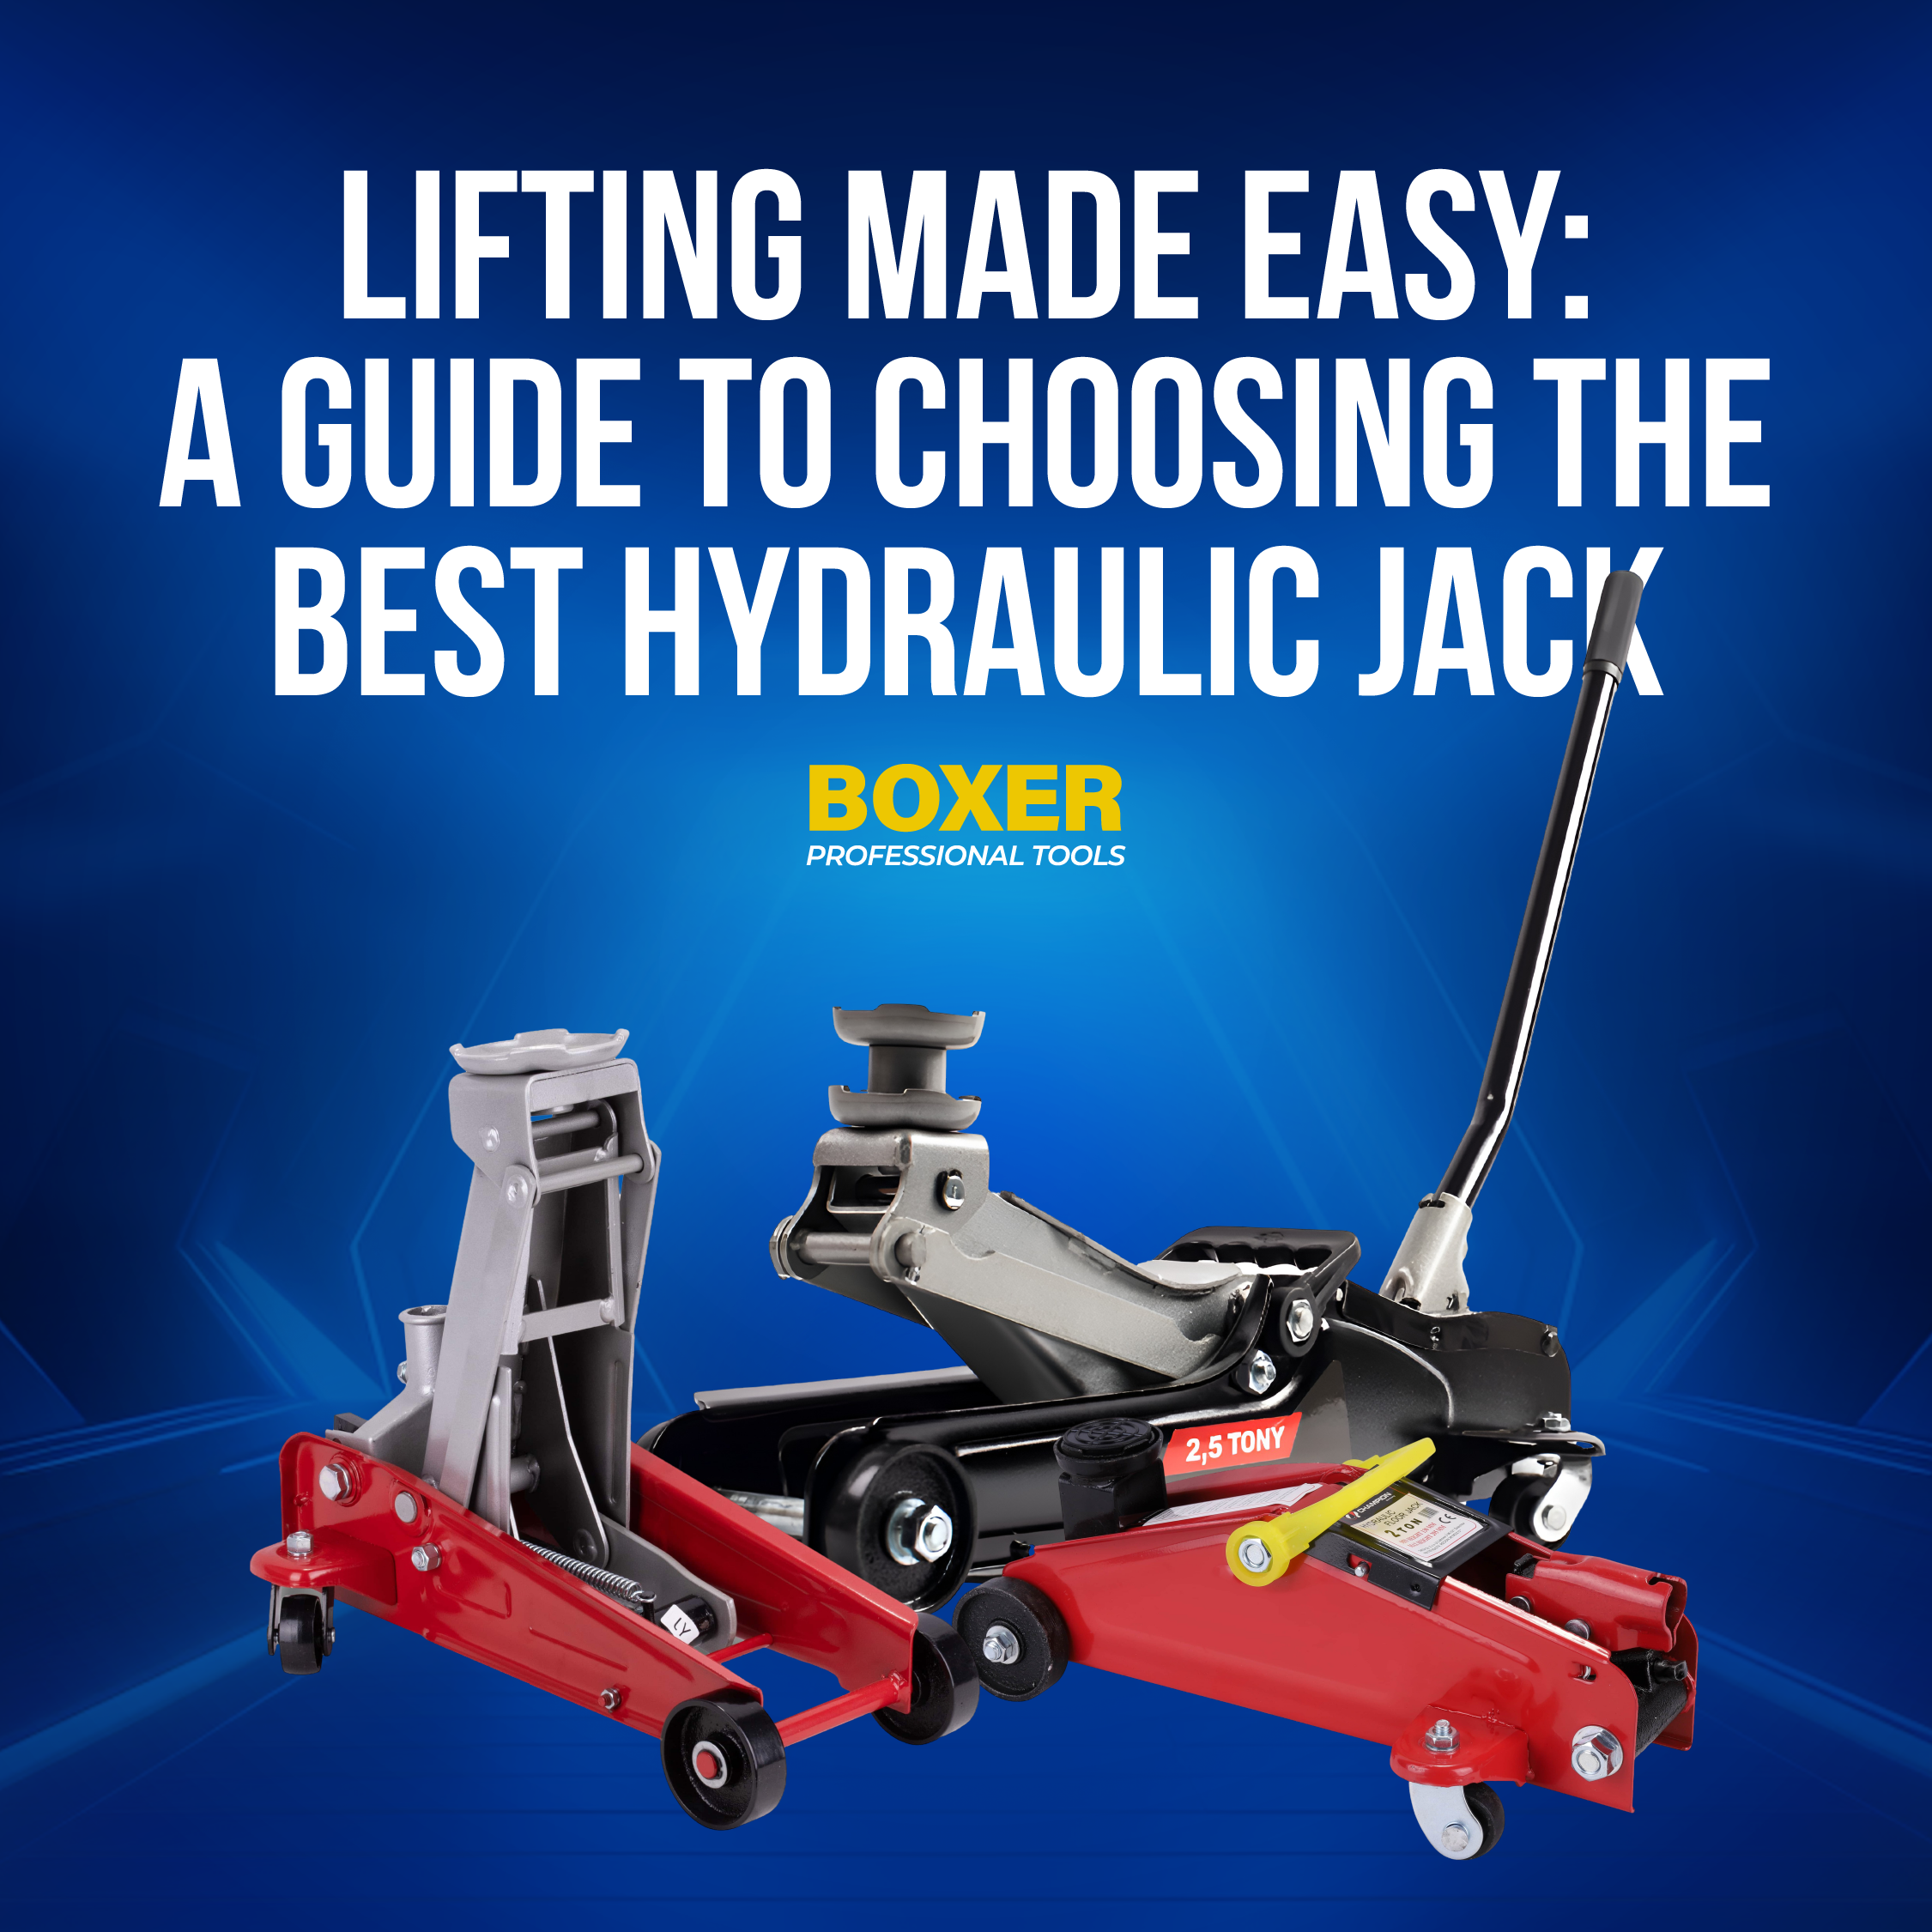 A Guide to Choosing the Best Hydraulic Jack